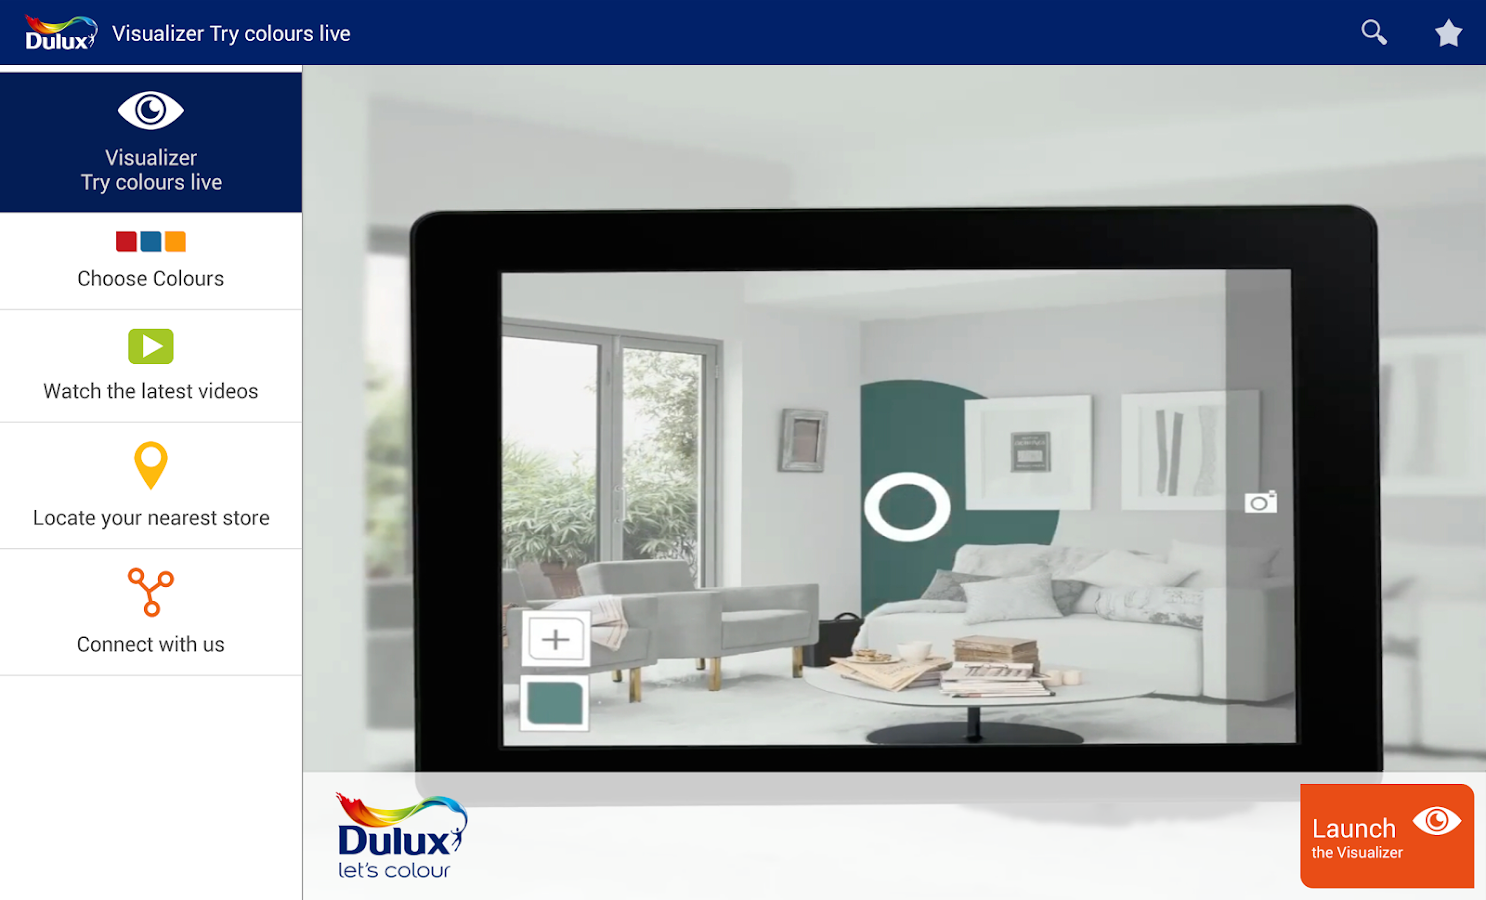  Dulux Visualizer IE Android Apps on Google Play